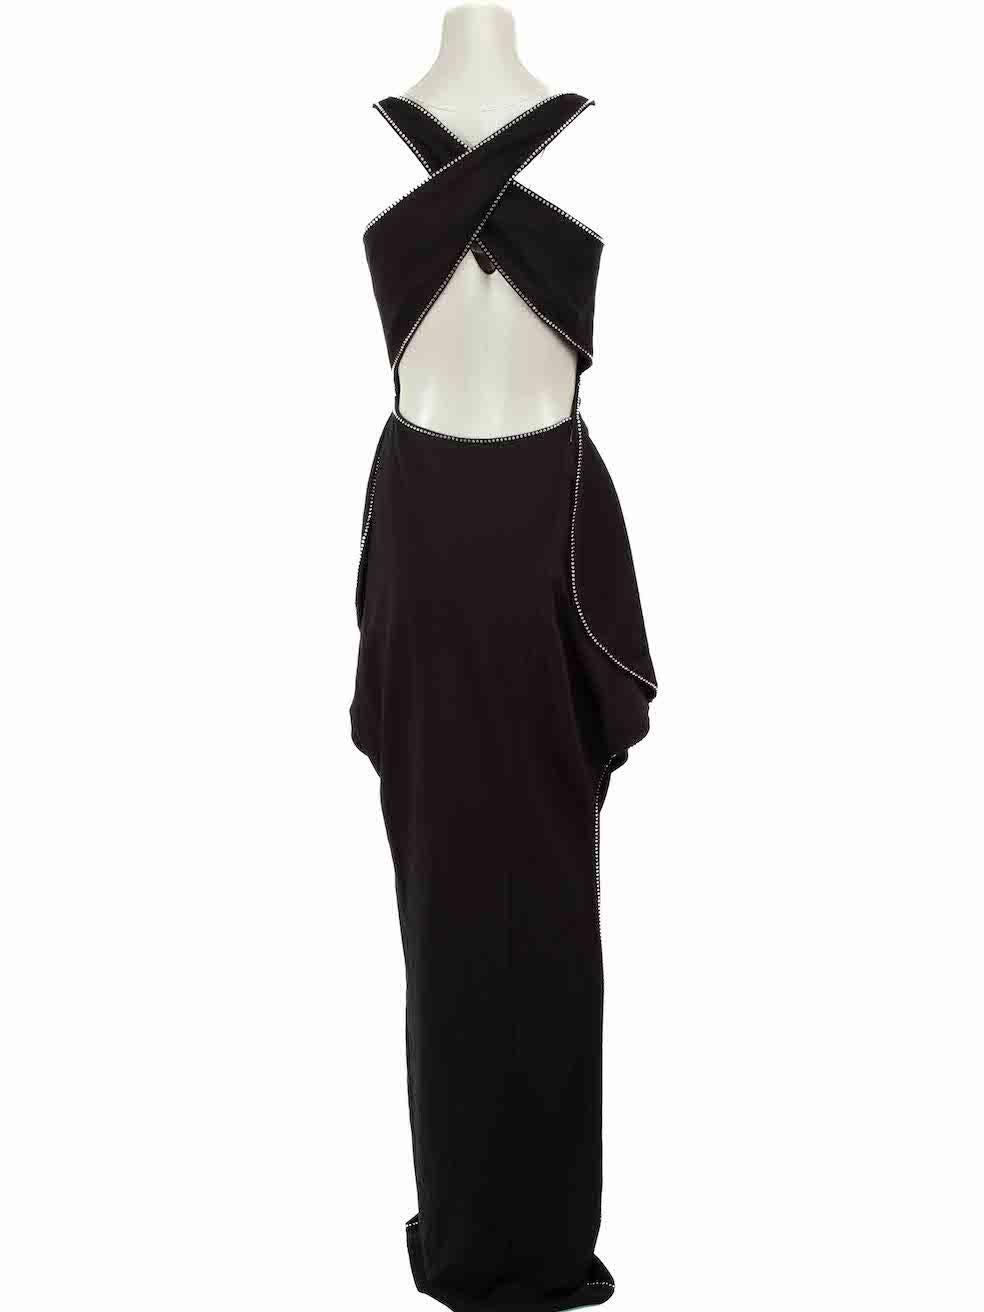 Burberry Black Draped Crystal Trim Cut-Out Gown Size XS In New Condition For Sale In London, GB